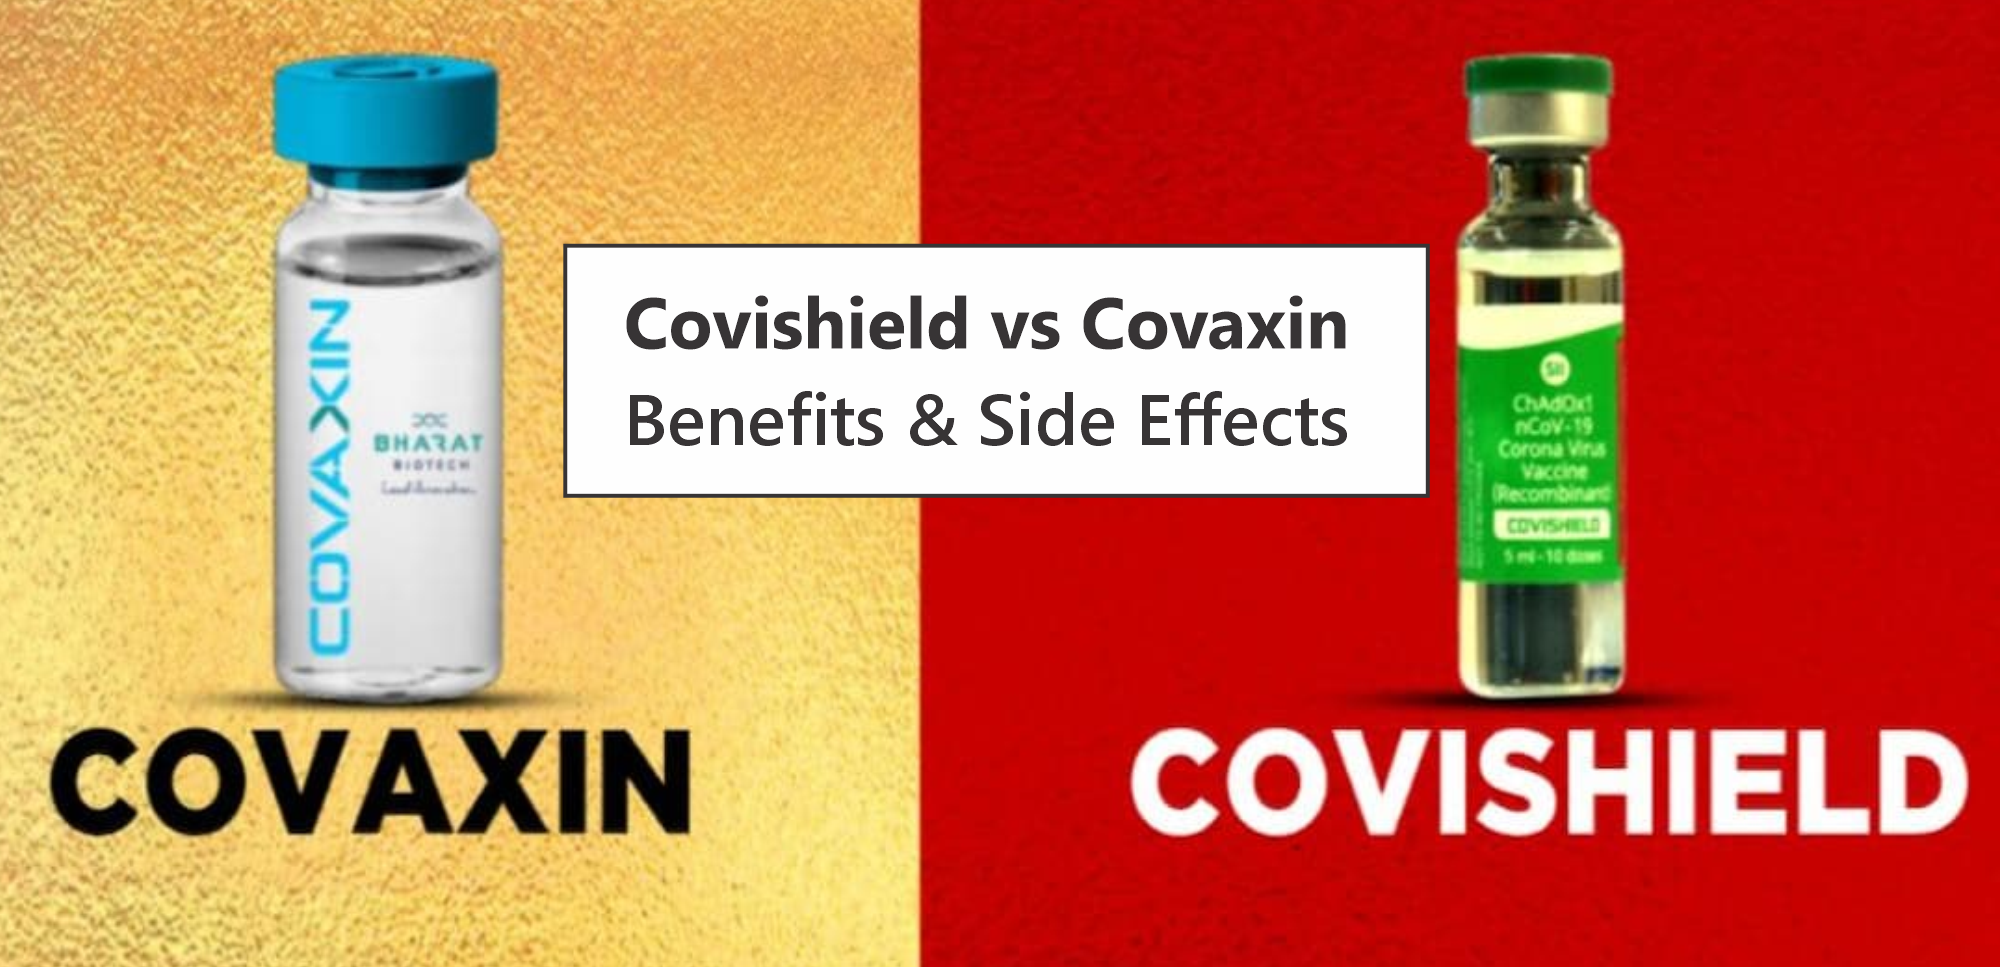 Covishield vs Covaxin: Benefits and Side Effects